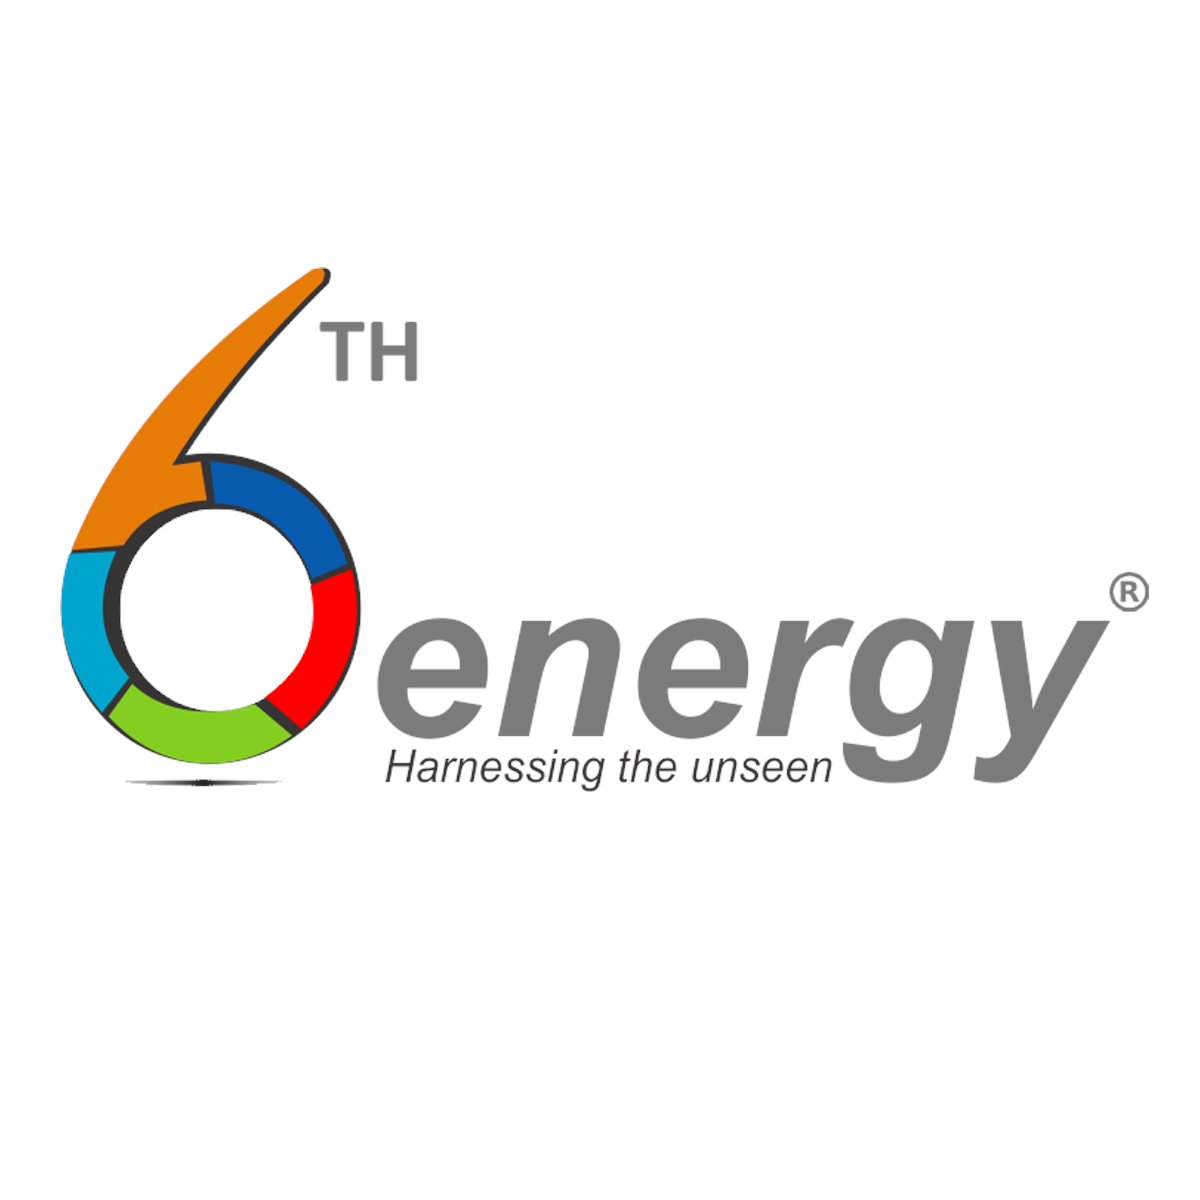 #WeAreHiring #SixthEnergy 
We are looking for a dynamic and highly talented professional to join our team and contribute to business success.

Apply Now:  6thenergy.com/we-are-hiring/

#BusinessAnalyst #HRecruiter #BusinessDeveloper 
6thenergy.com